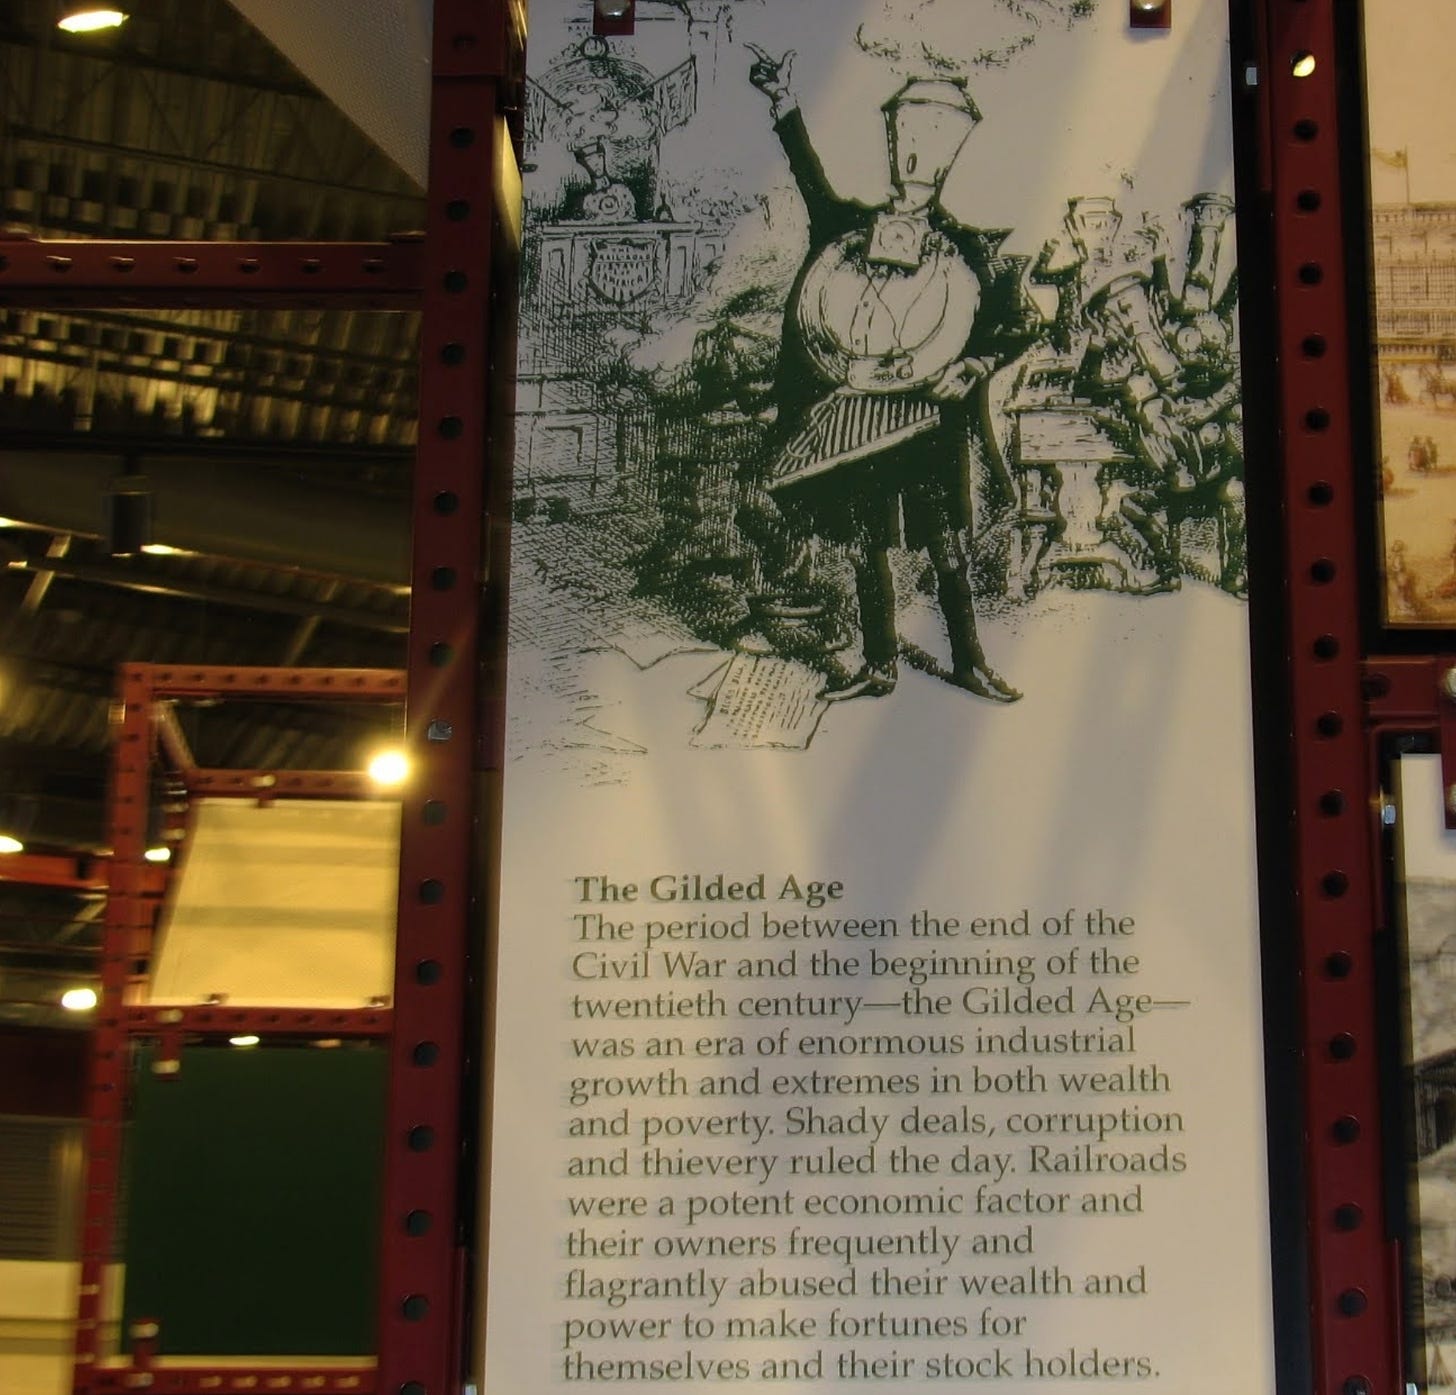 Sign in the museum at Steamtown National Historic Site in Scranton Pennsylvania has a drawing of a fancy person dressed up as a train with hand raised, and railroad workers in the background. The text reads The Gilded Age. The period between the end of the Civil War and the beginning of the twentieth century — the Gilded Age — was an era of enormous industrial growth and extremes in both wealth and poverty. Shady deals, corruption, and thievery ruled the day. Railroads were a potent economic factor and their owners frequently and flagrantly abused their wealth and power to make fortunes for themselves and their stock holders. 